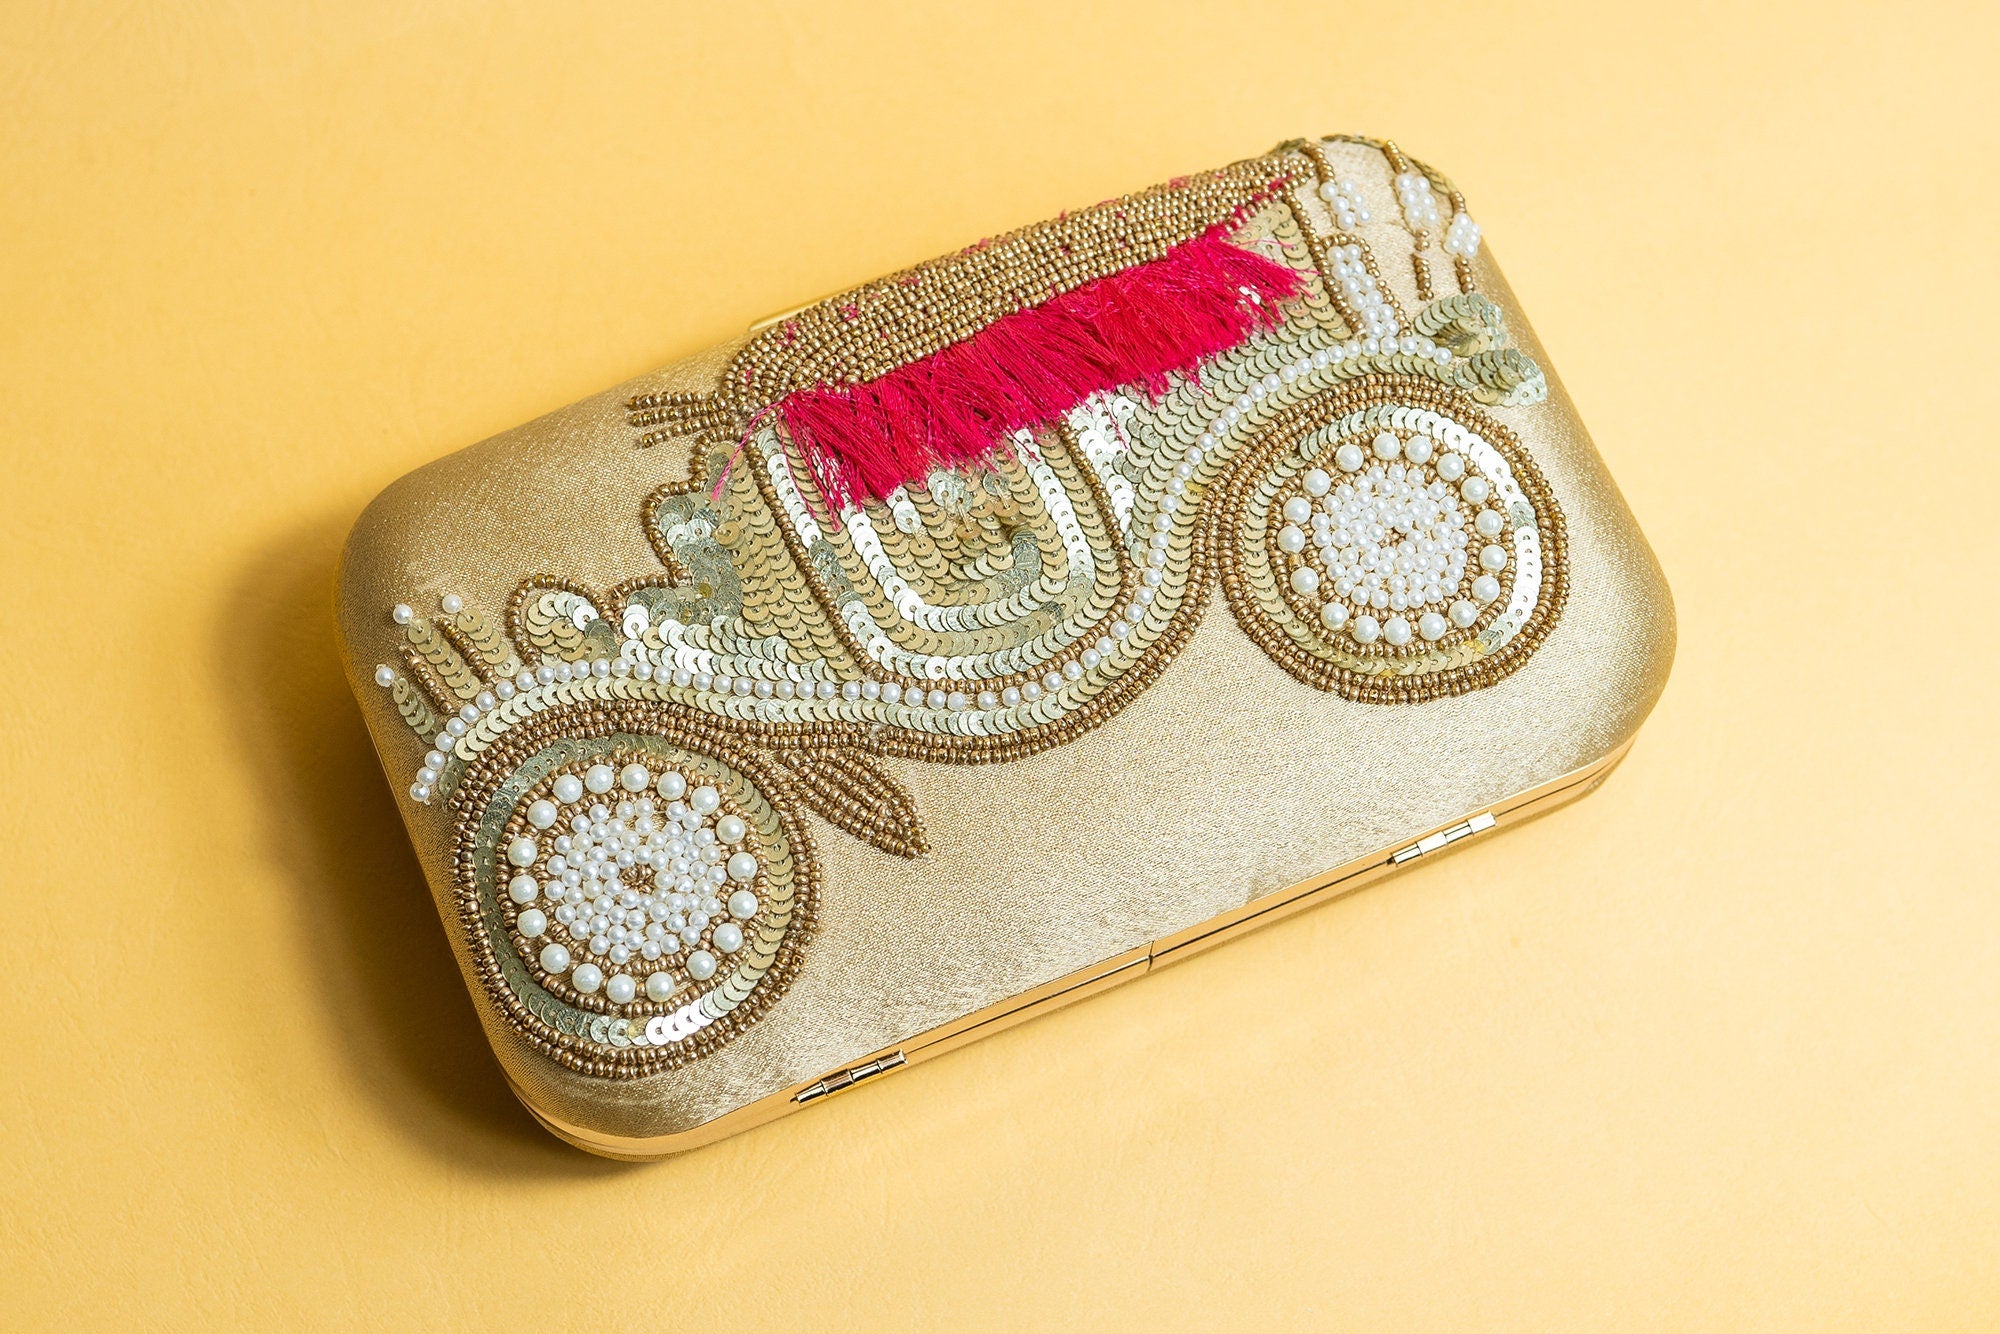 Gold silk clutch purse/bag, hand made embroidery clutch bag with detachable metal sling